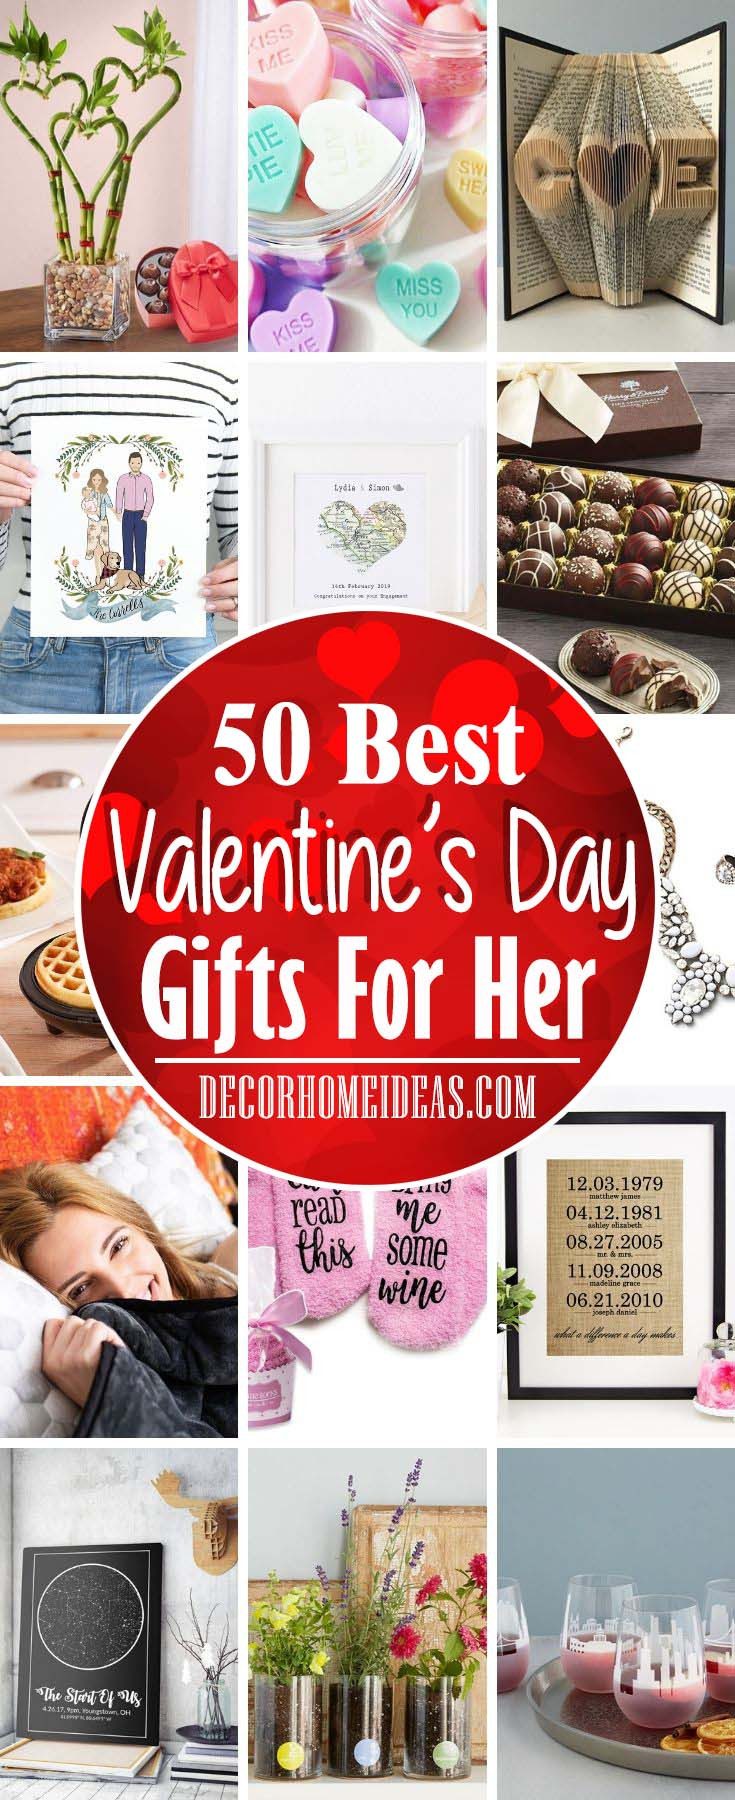 Valentines Gift Ideas For Her
 50 Best Valentine s Day Gifts For Her 2020 Update